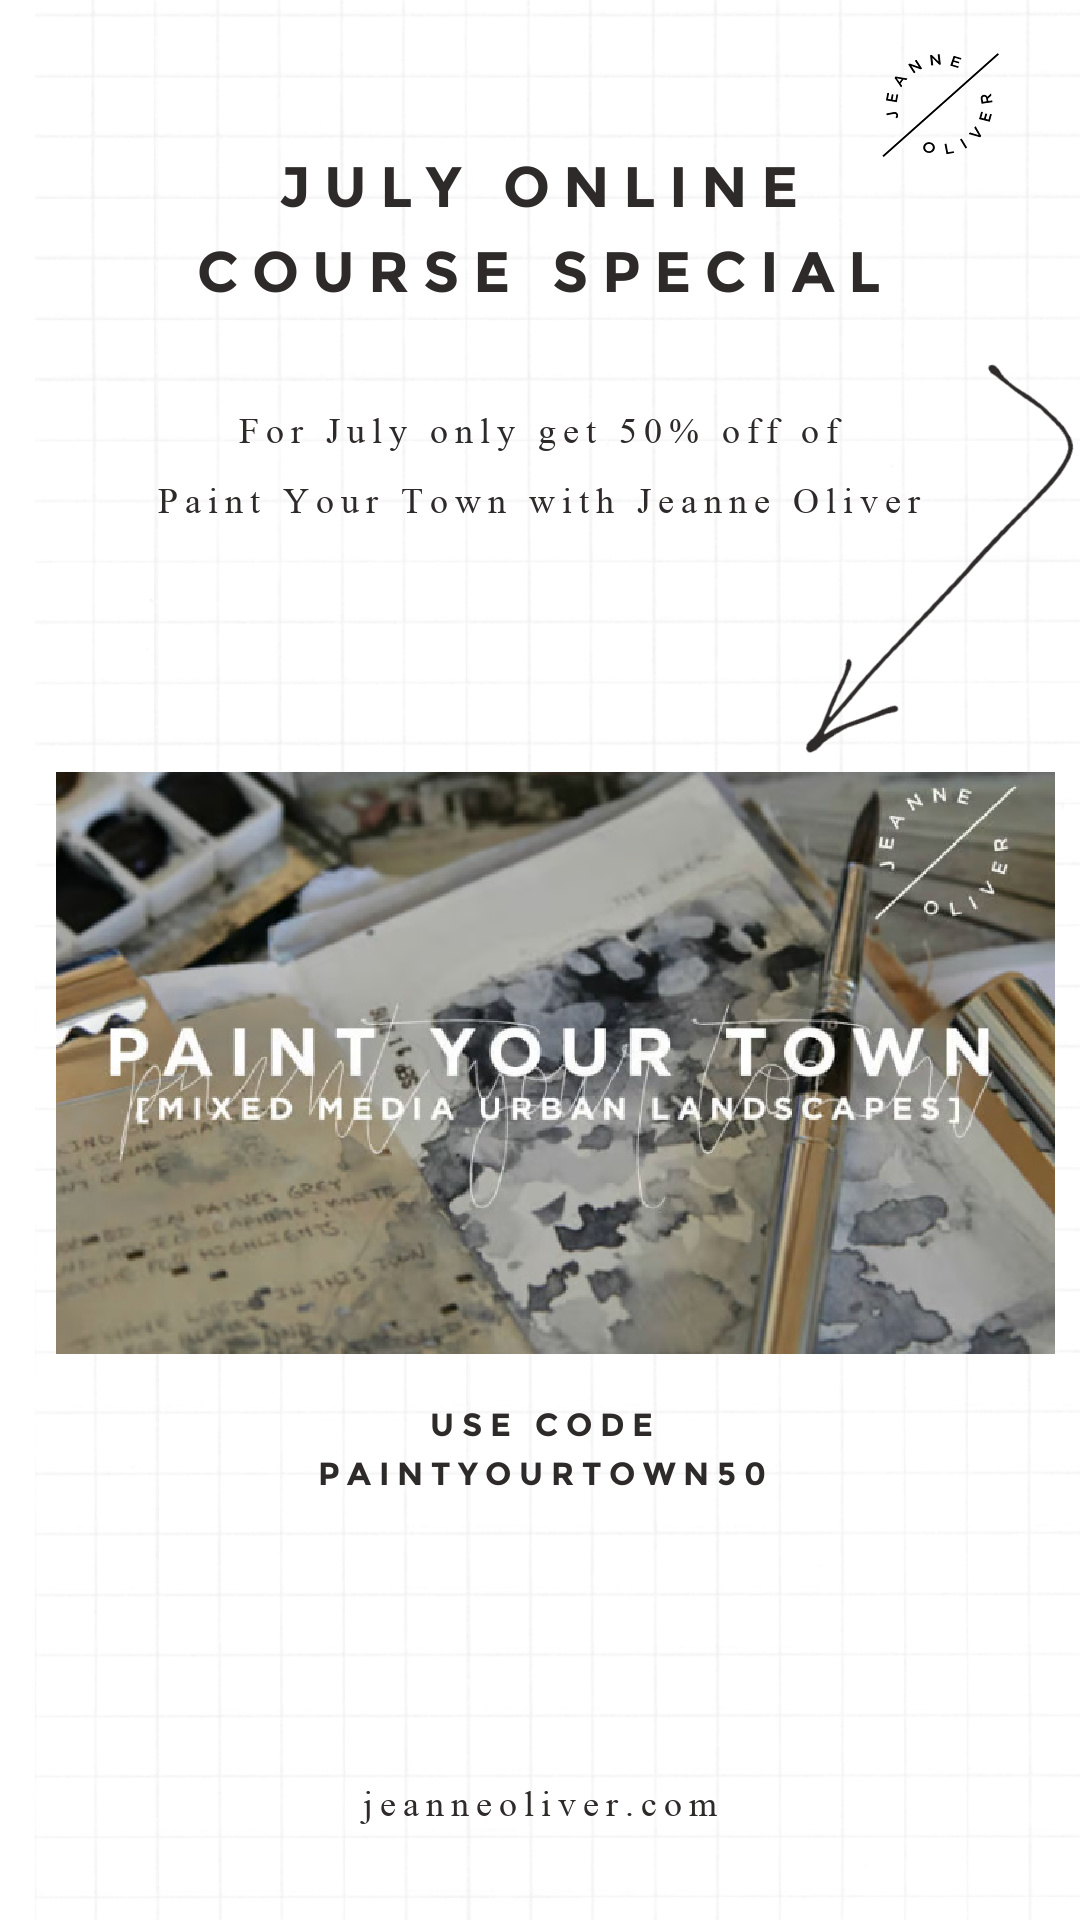 July Online Course Special | Paint Your Town with Jeanne Oliver